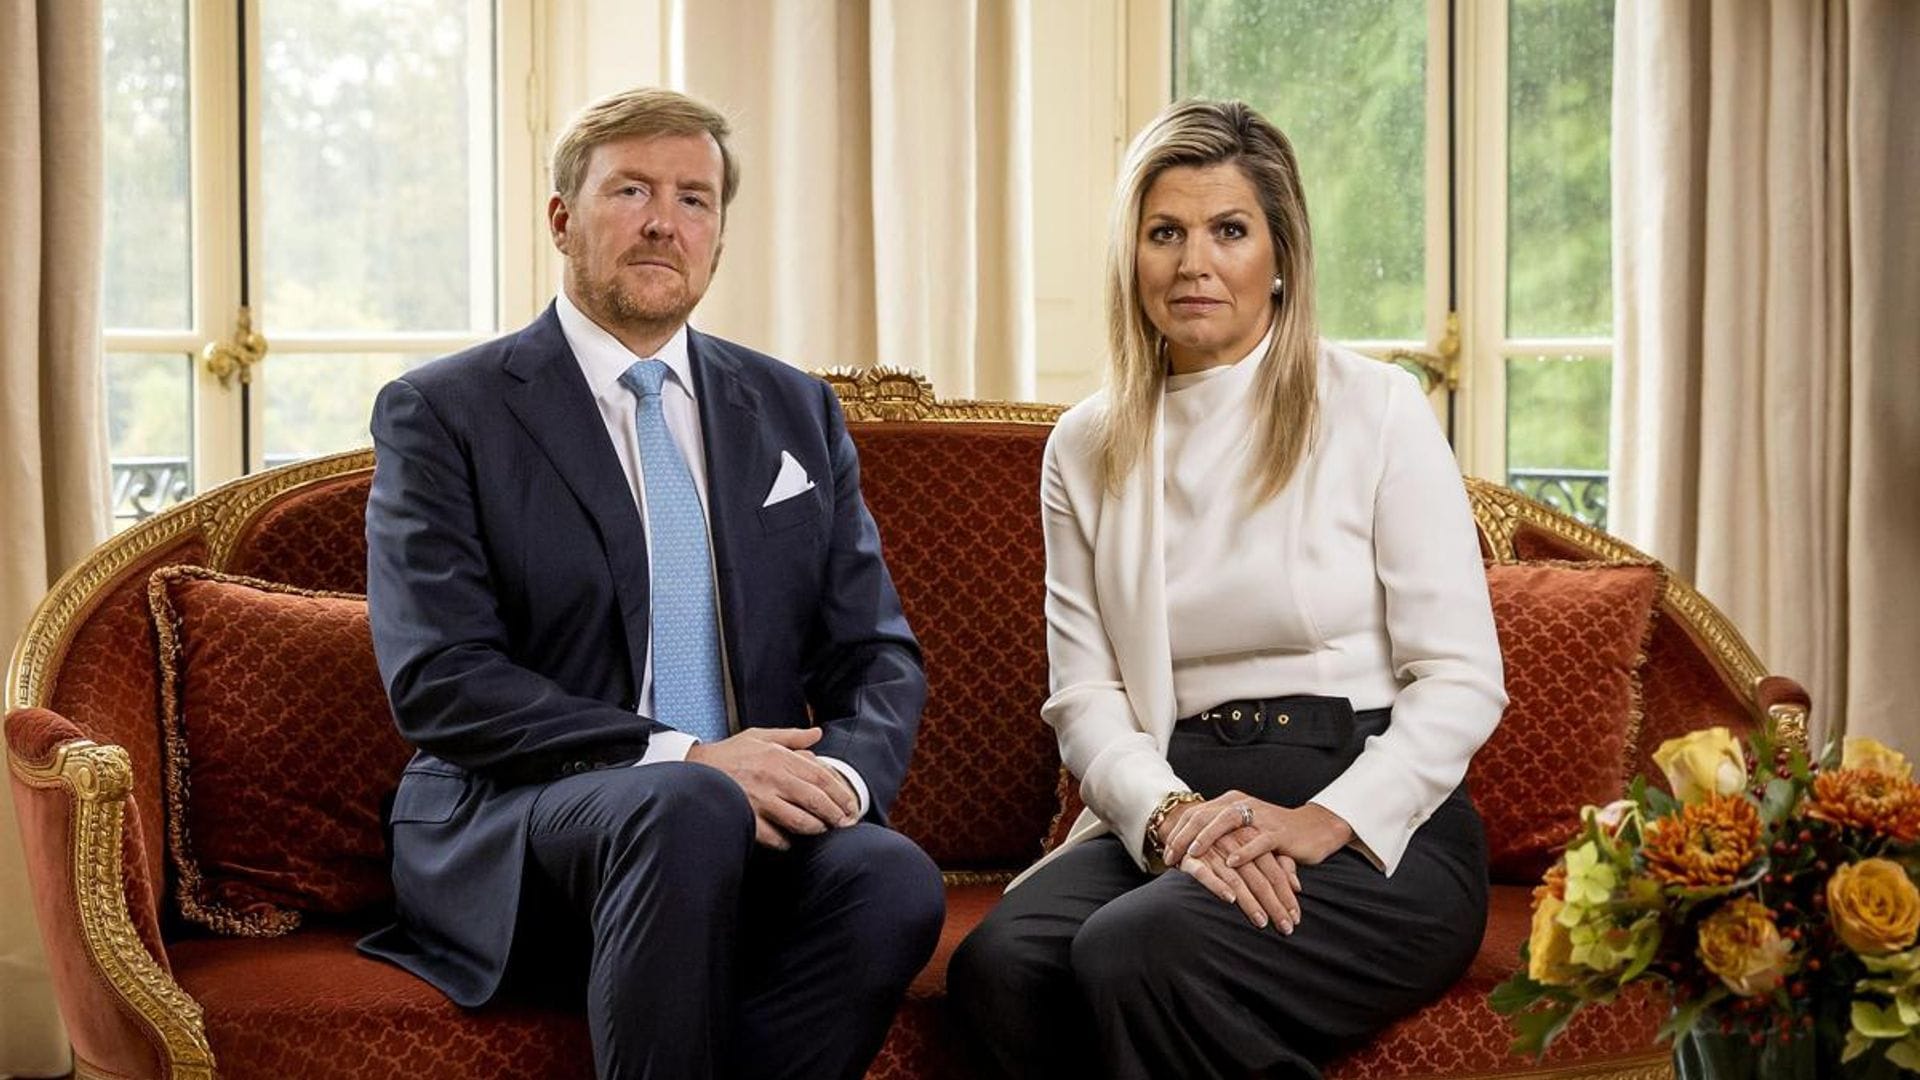 Queen Maxima and King Willem-Alexander respond to Russian invasion: ‘Our hearts go out to the people of Ukraine’